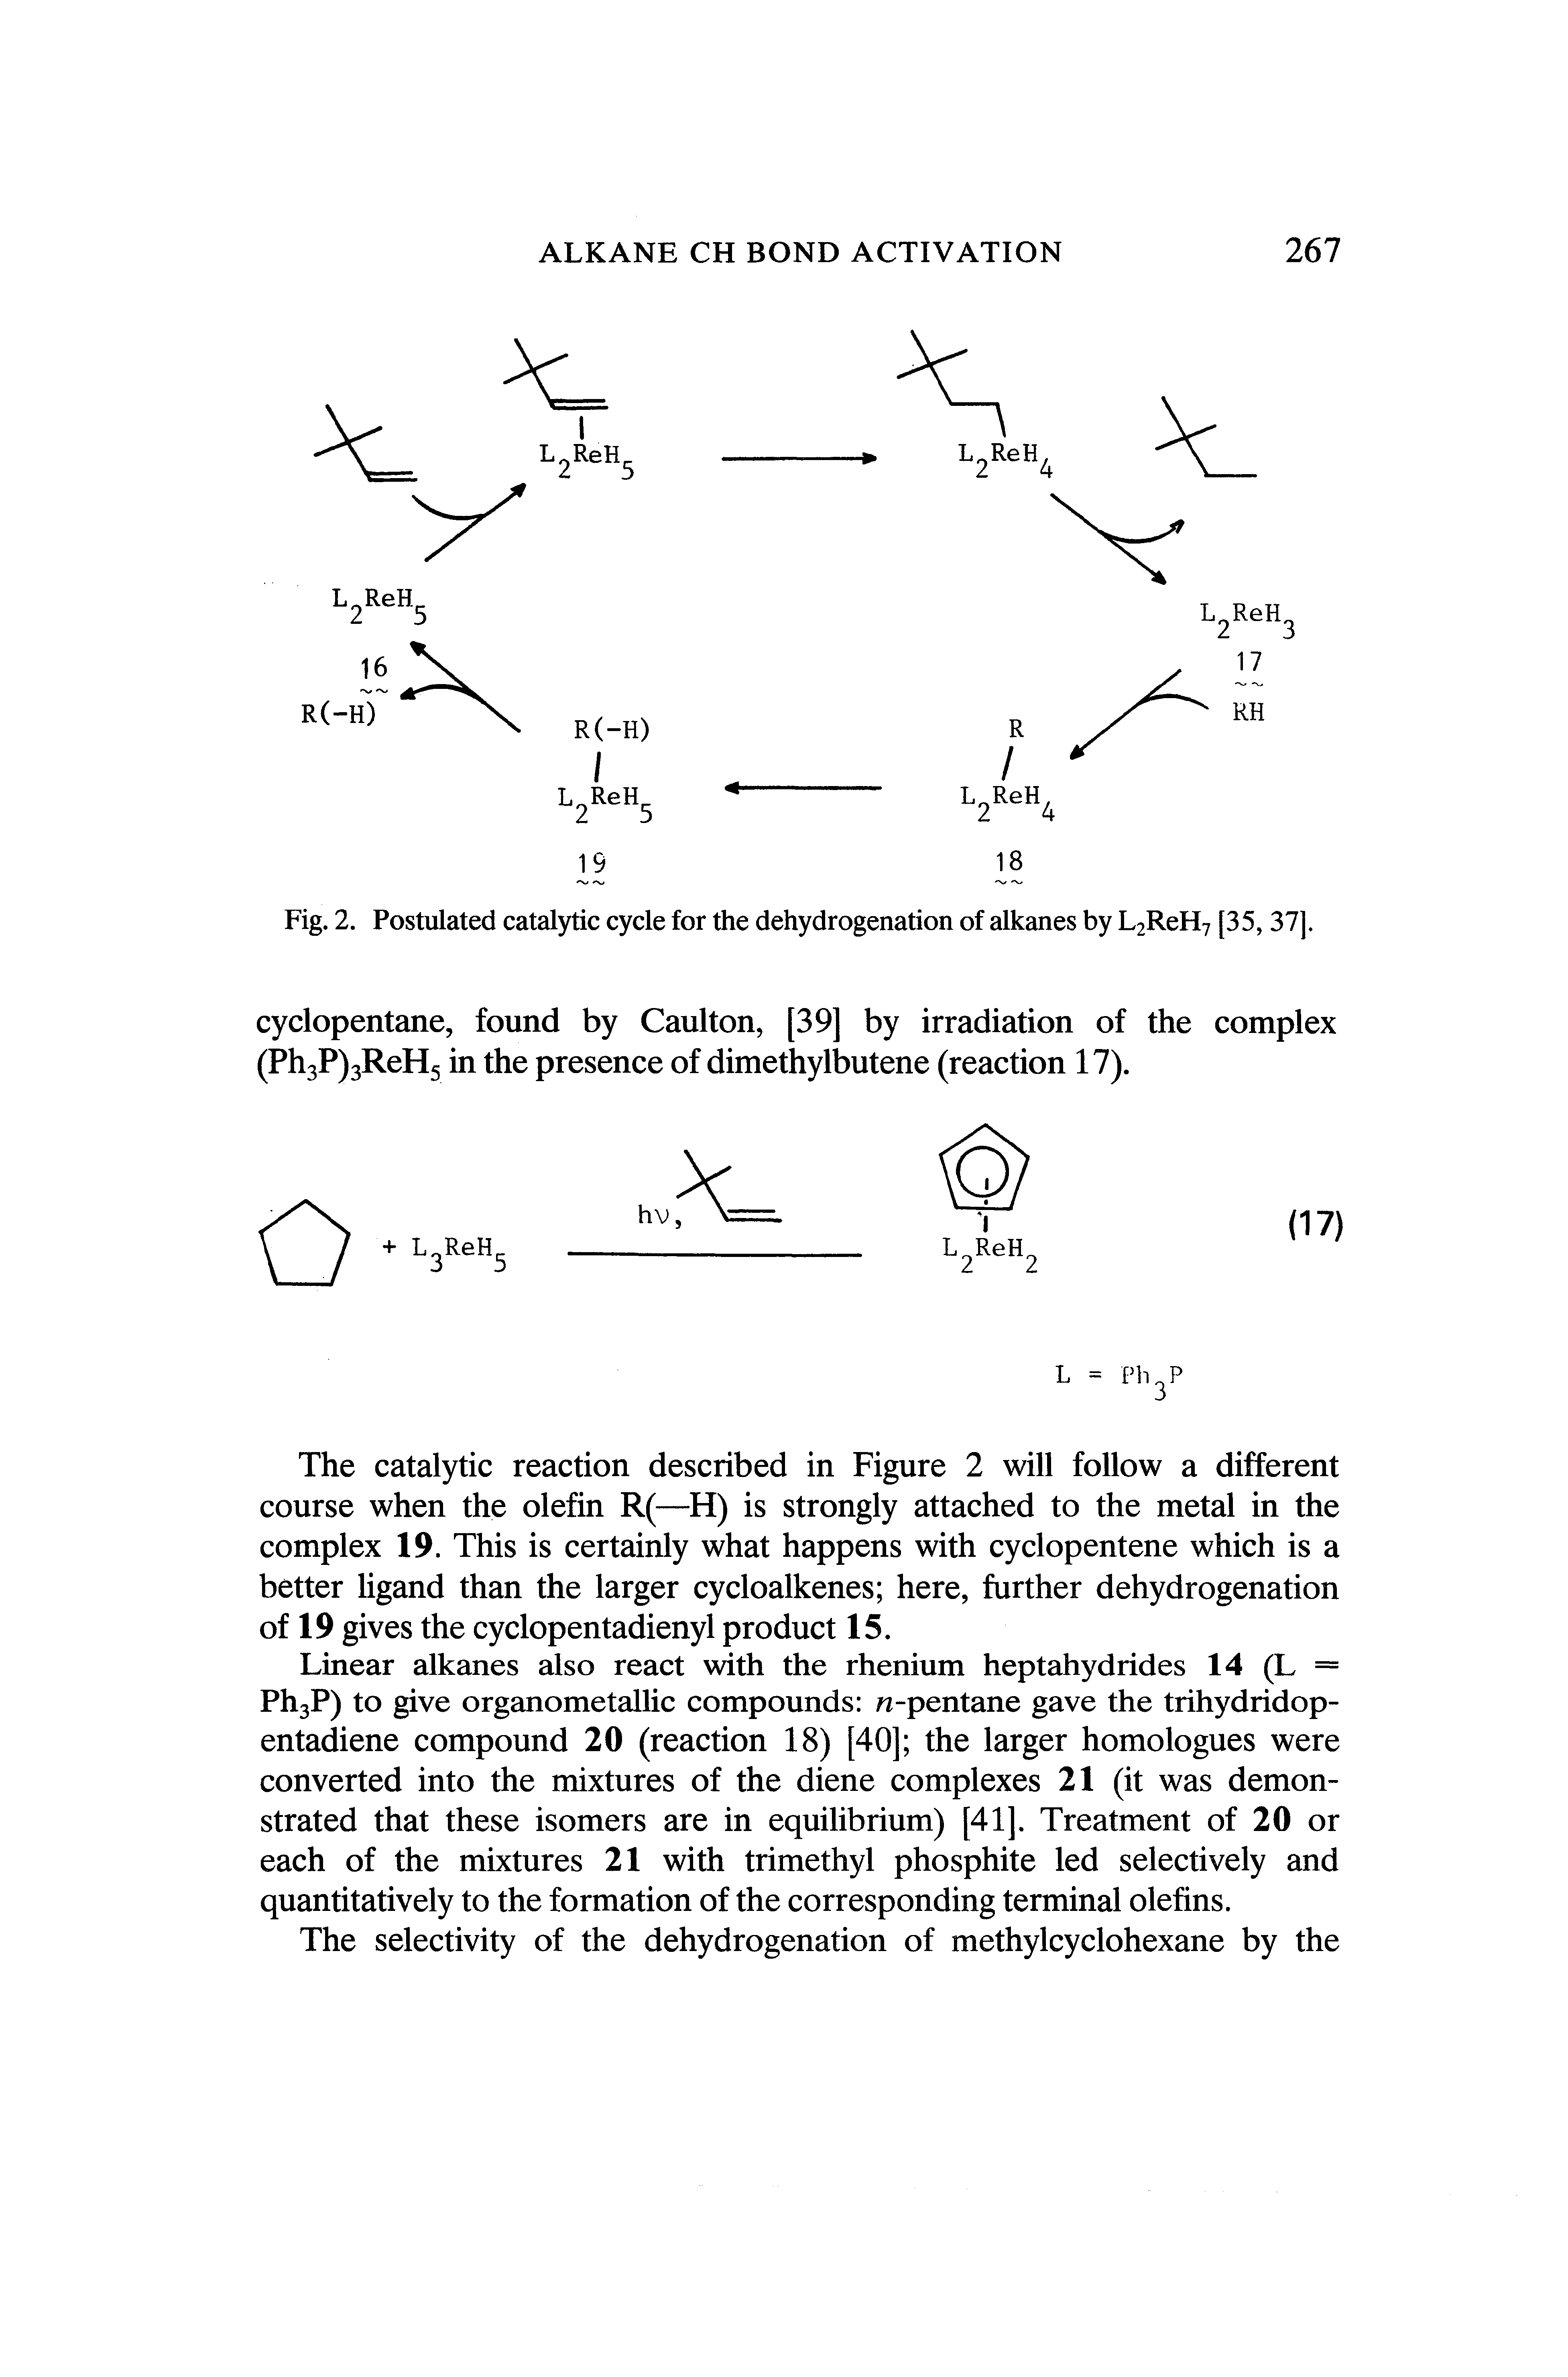 Fig. 2. Postulated catalytic cycle for the dehydrogenation of alkanes by L2ReH7 [35,37].